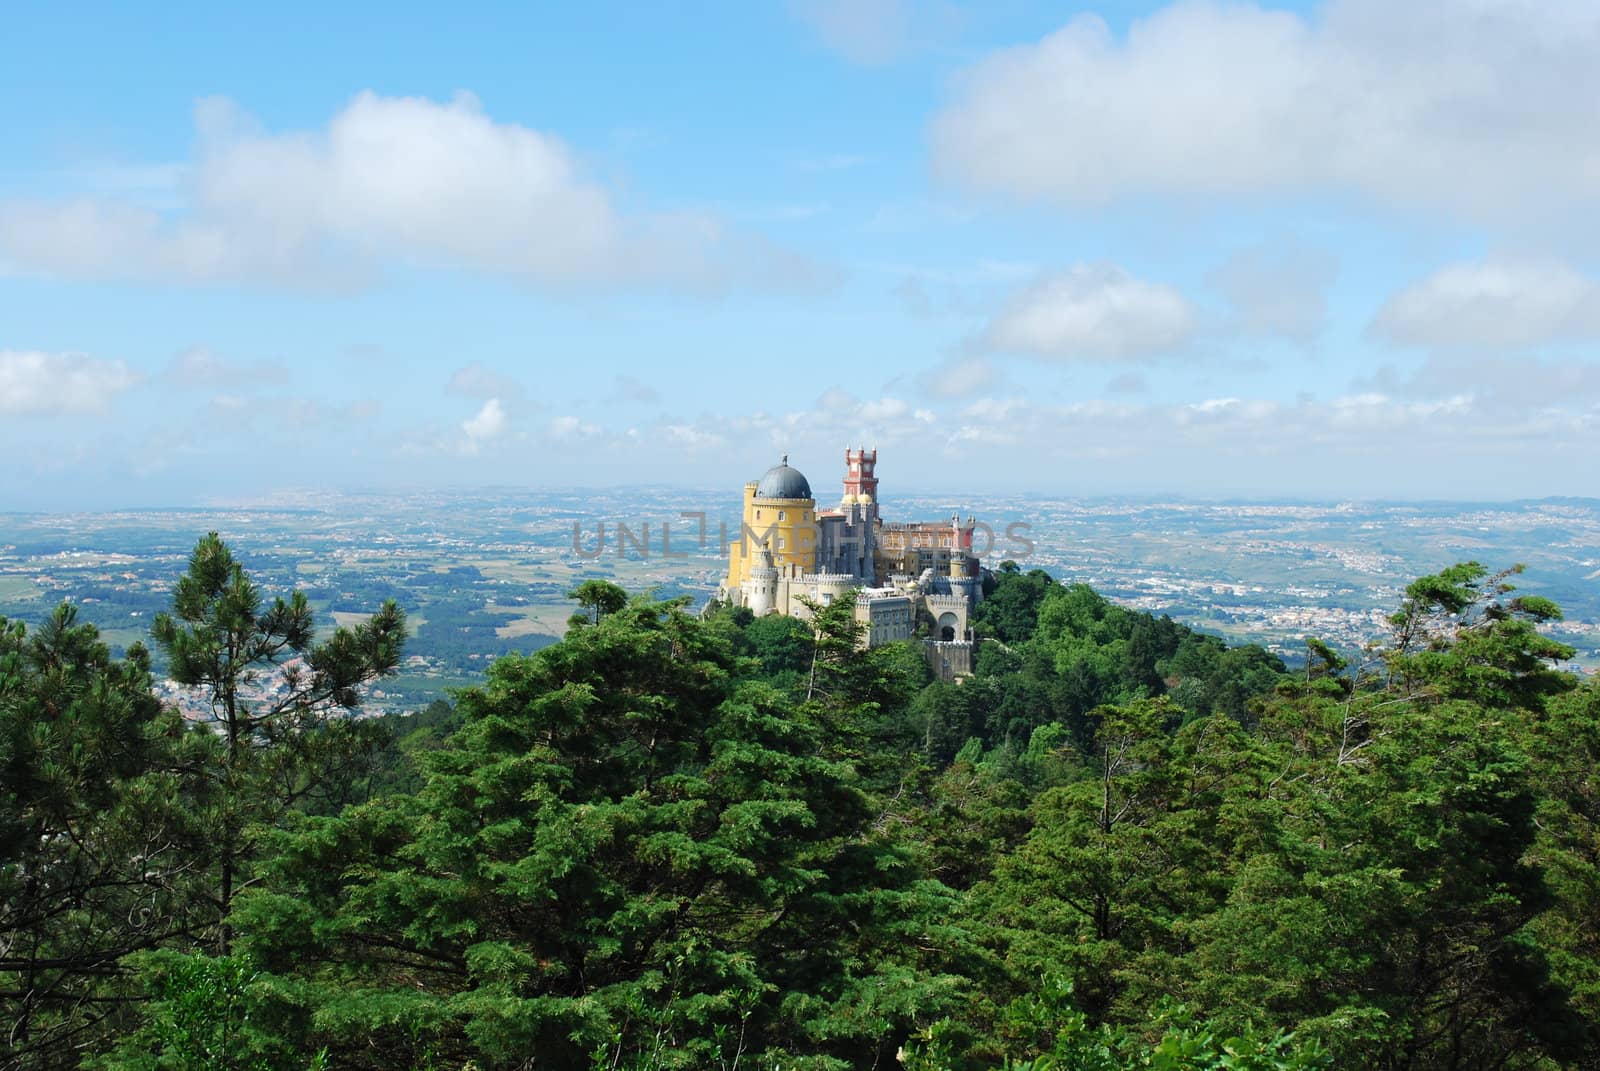 Colorful Palace of Pena landscape view in Sintra, Portugal. by luissantos84